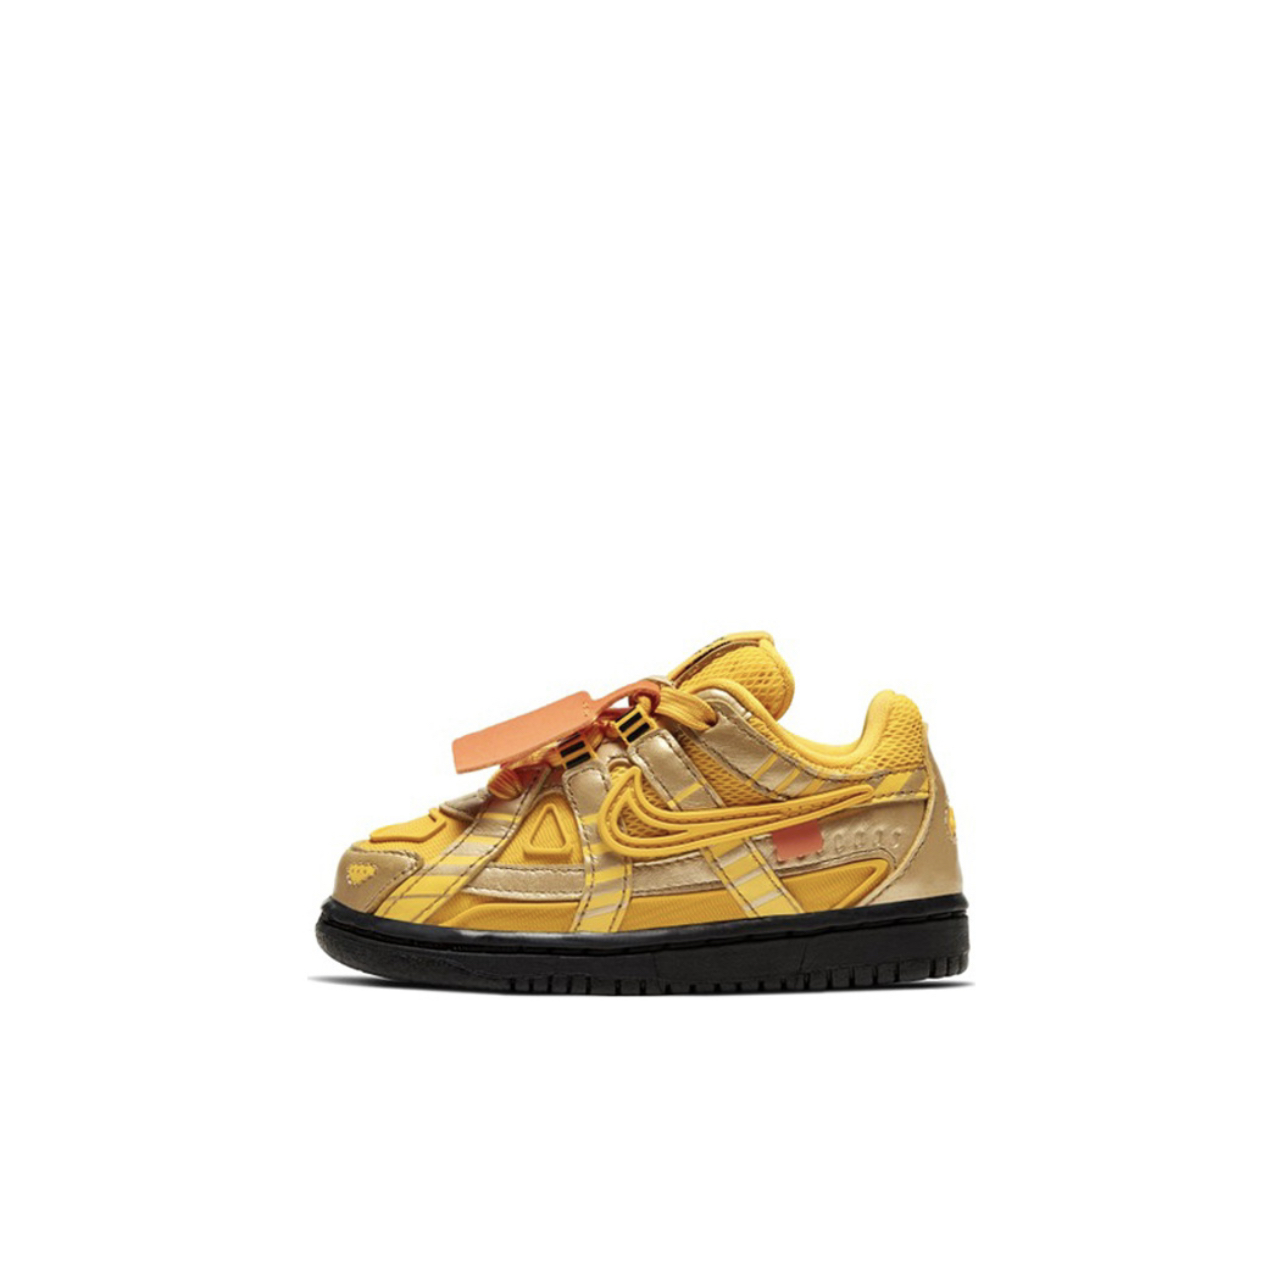 Off White x Nike Air Rubber Dunk University Gold